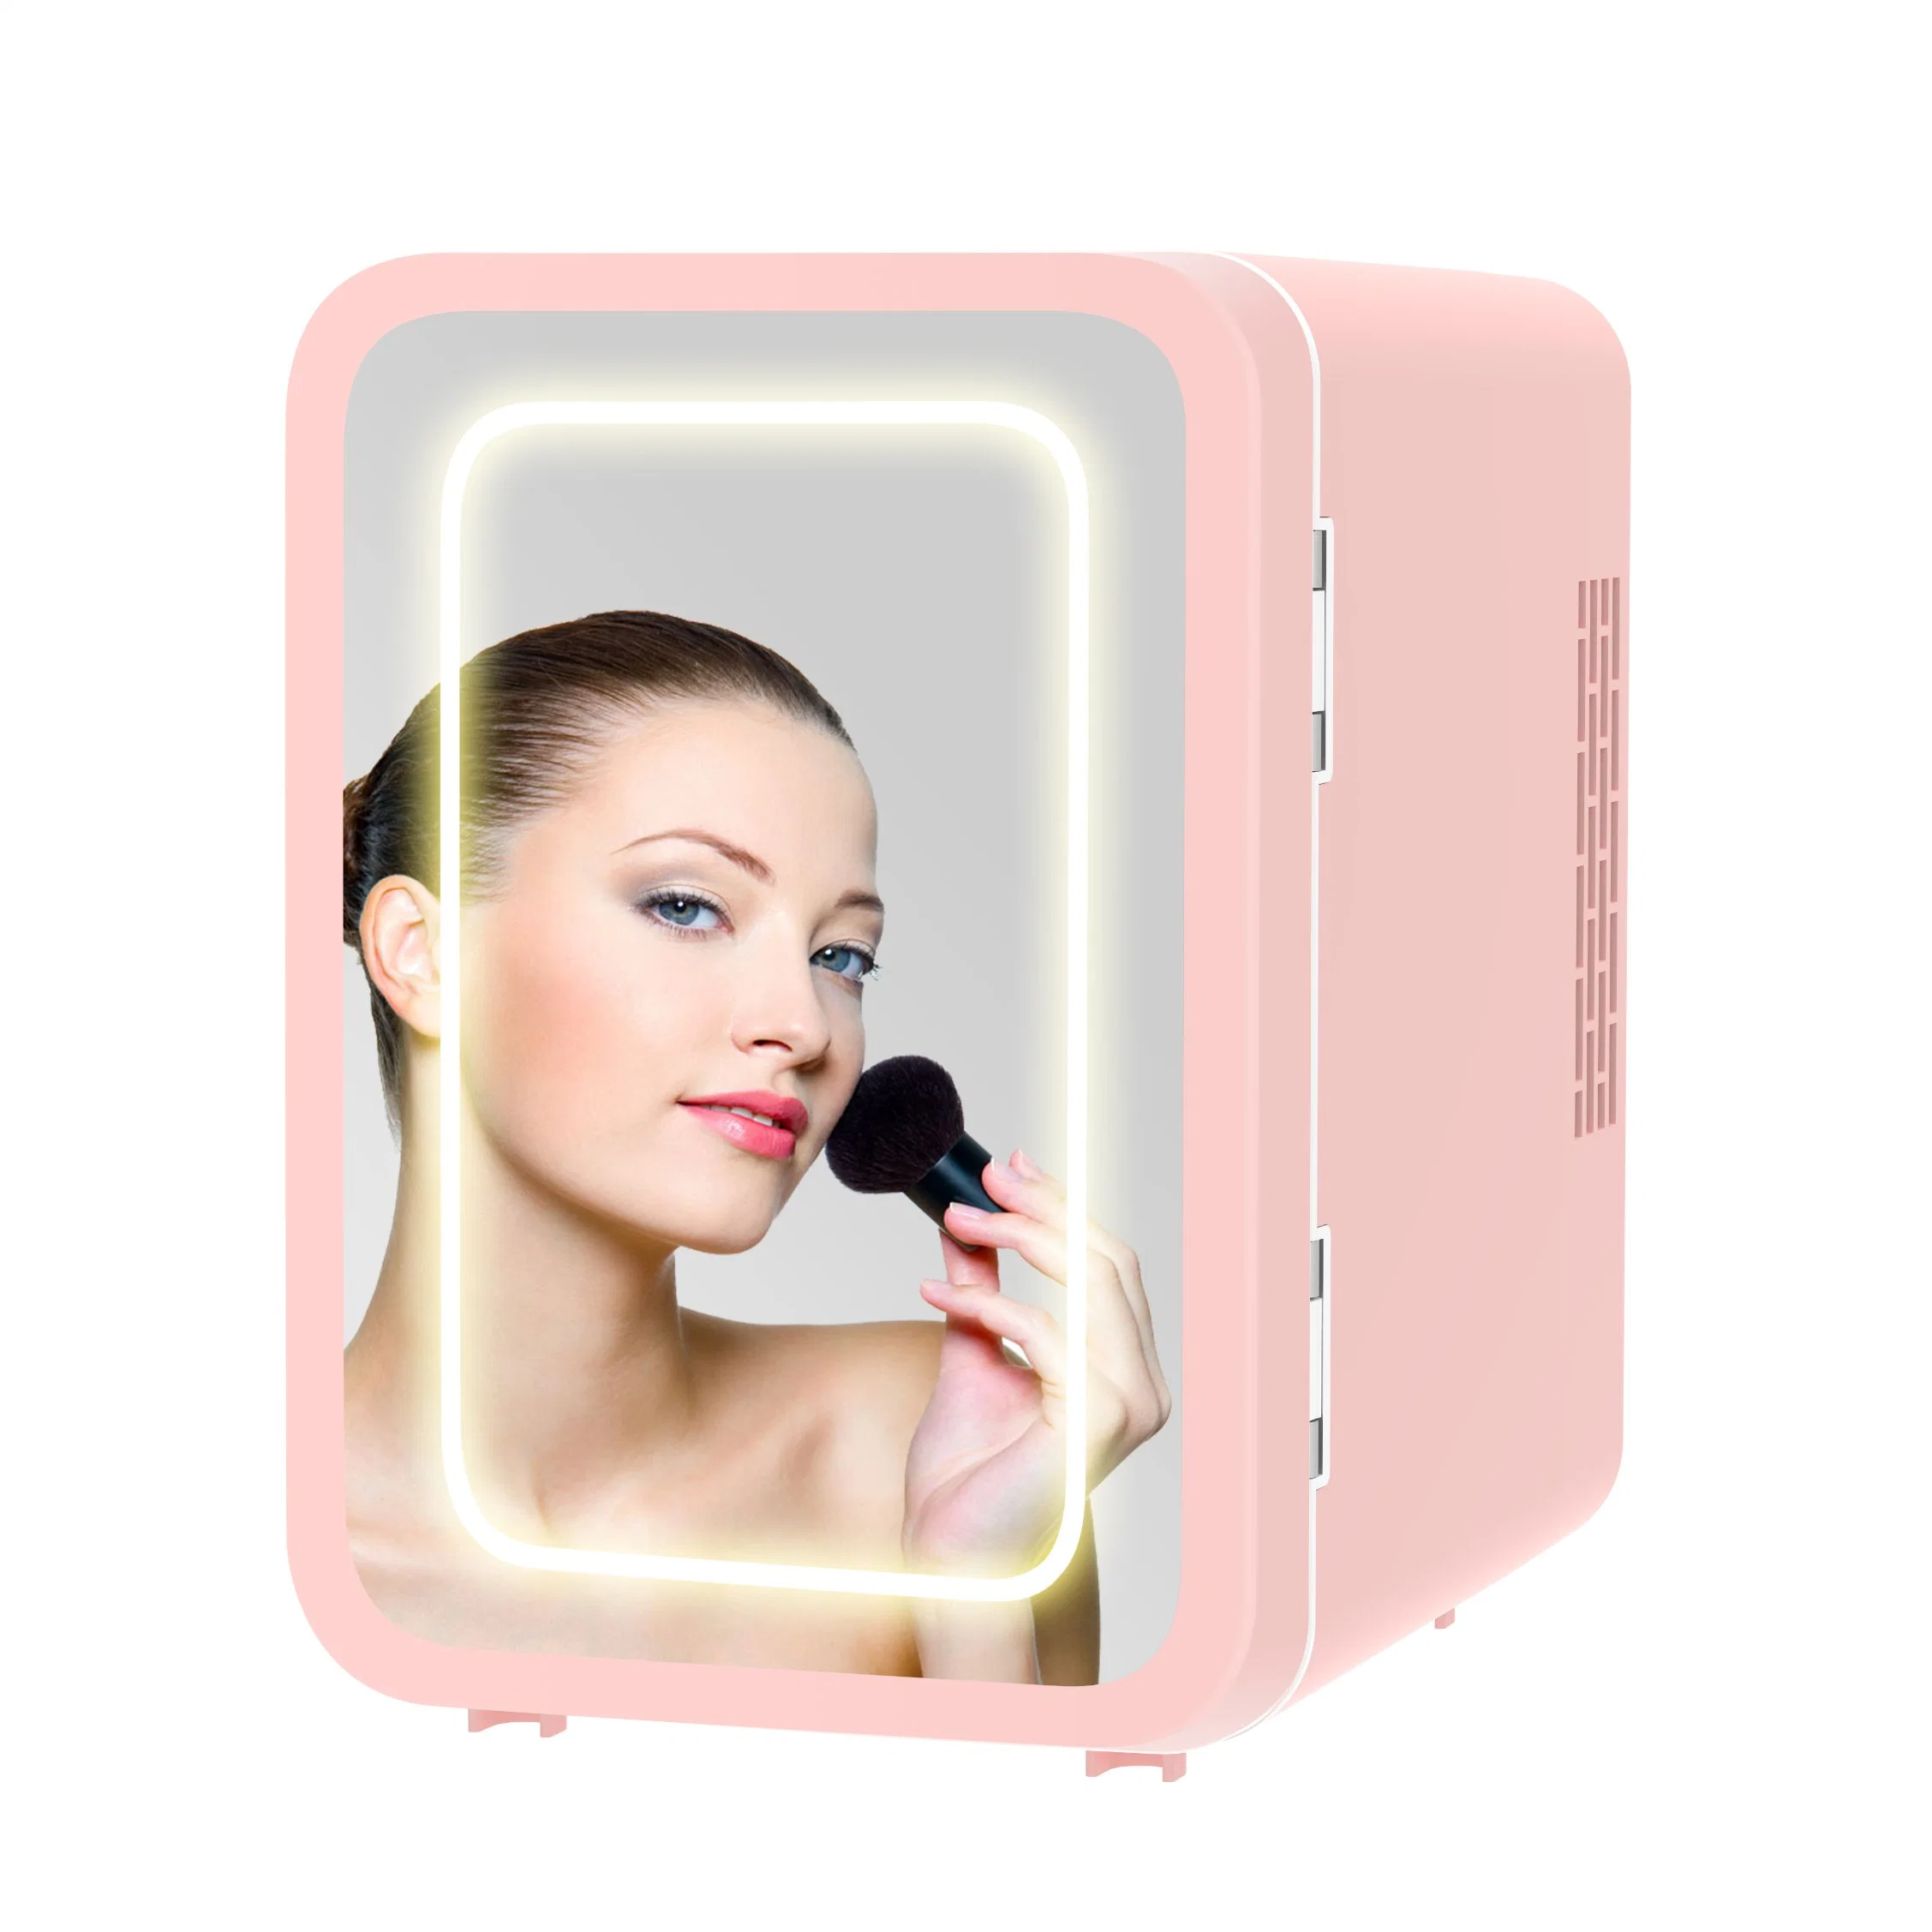 LED Light Thermoelectric Skincare Makeup Cosmetic Mini Fridge with Mirror